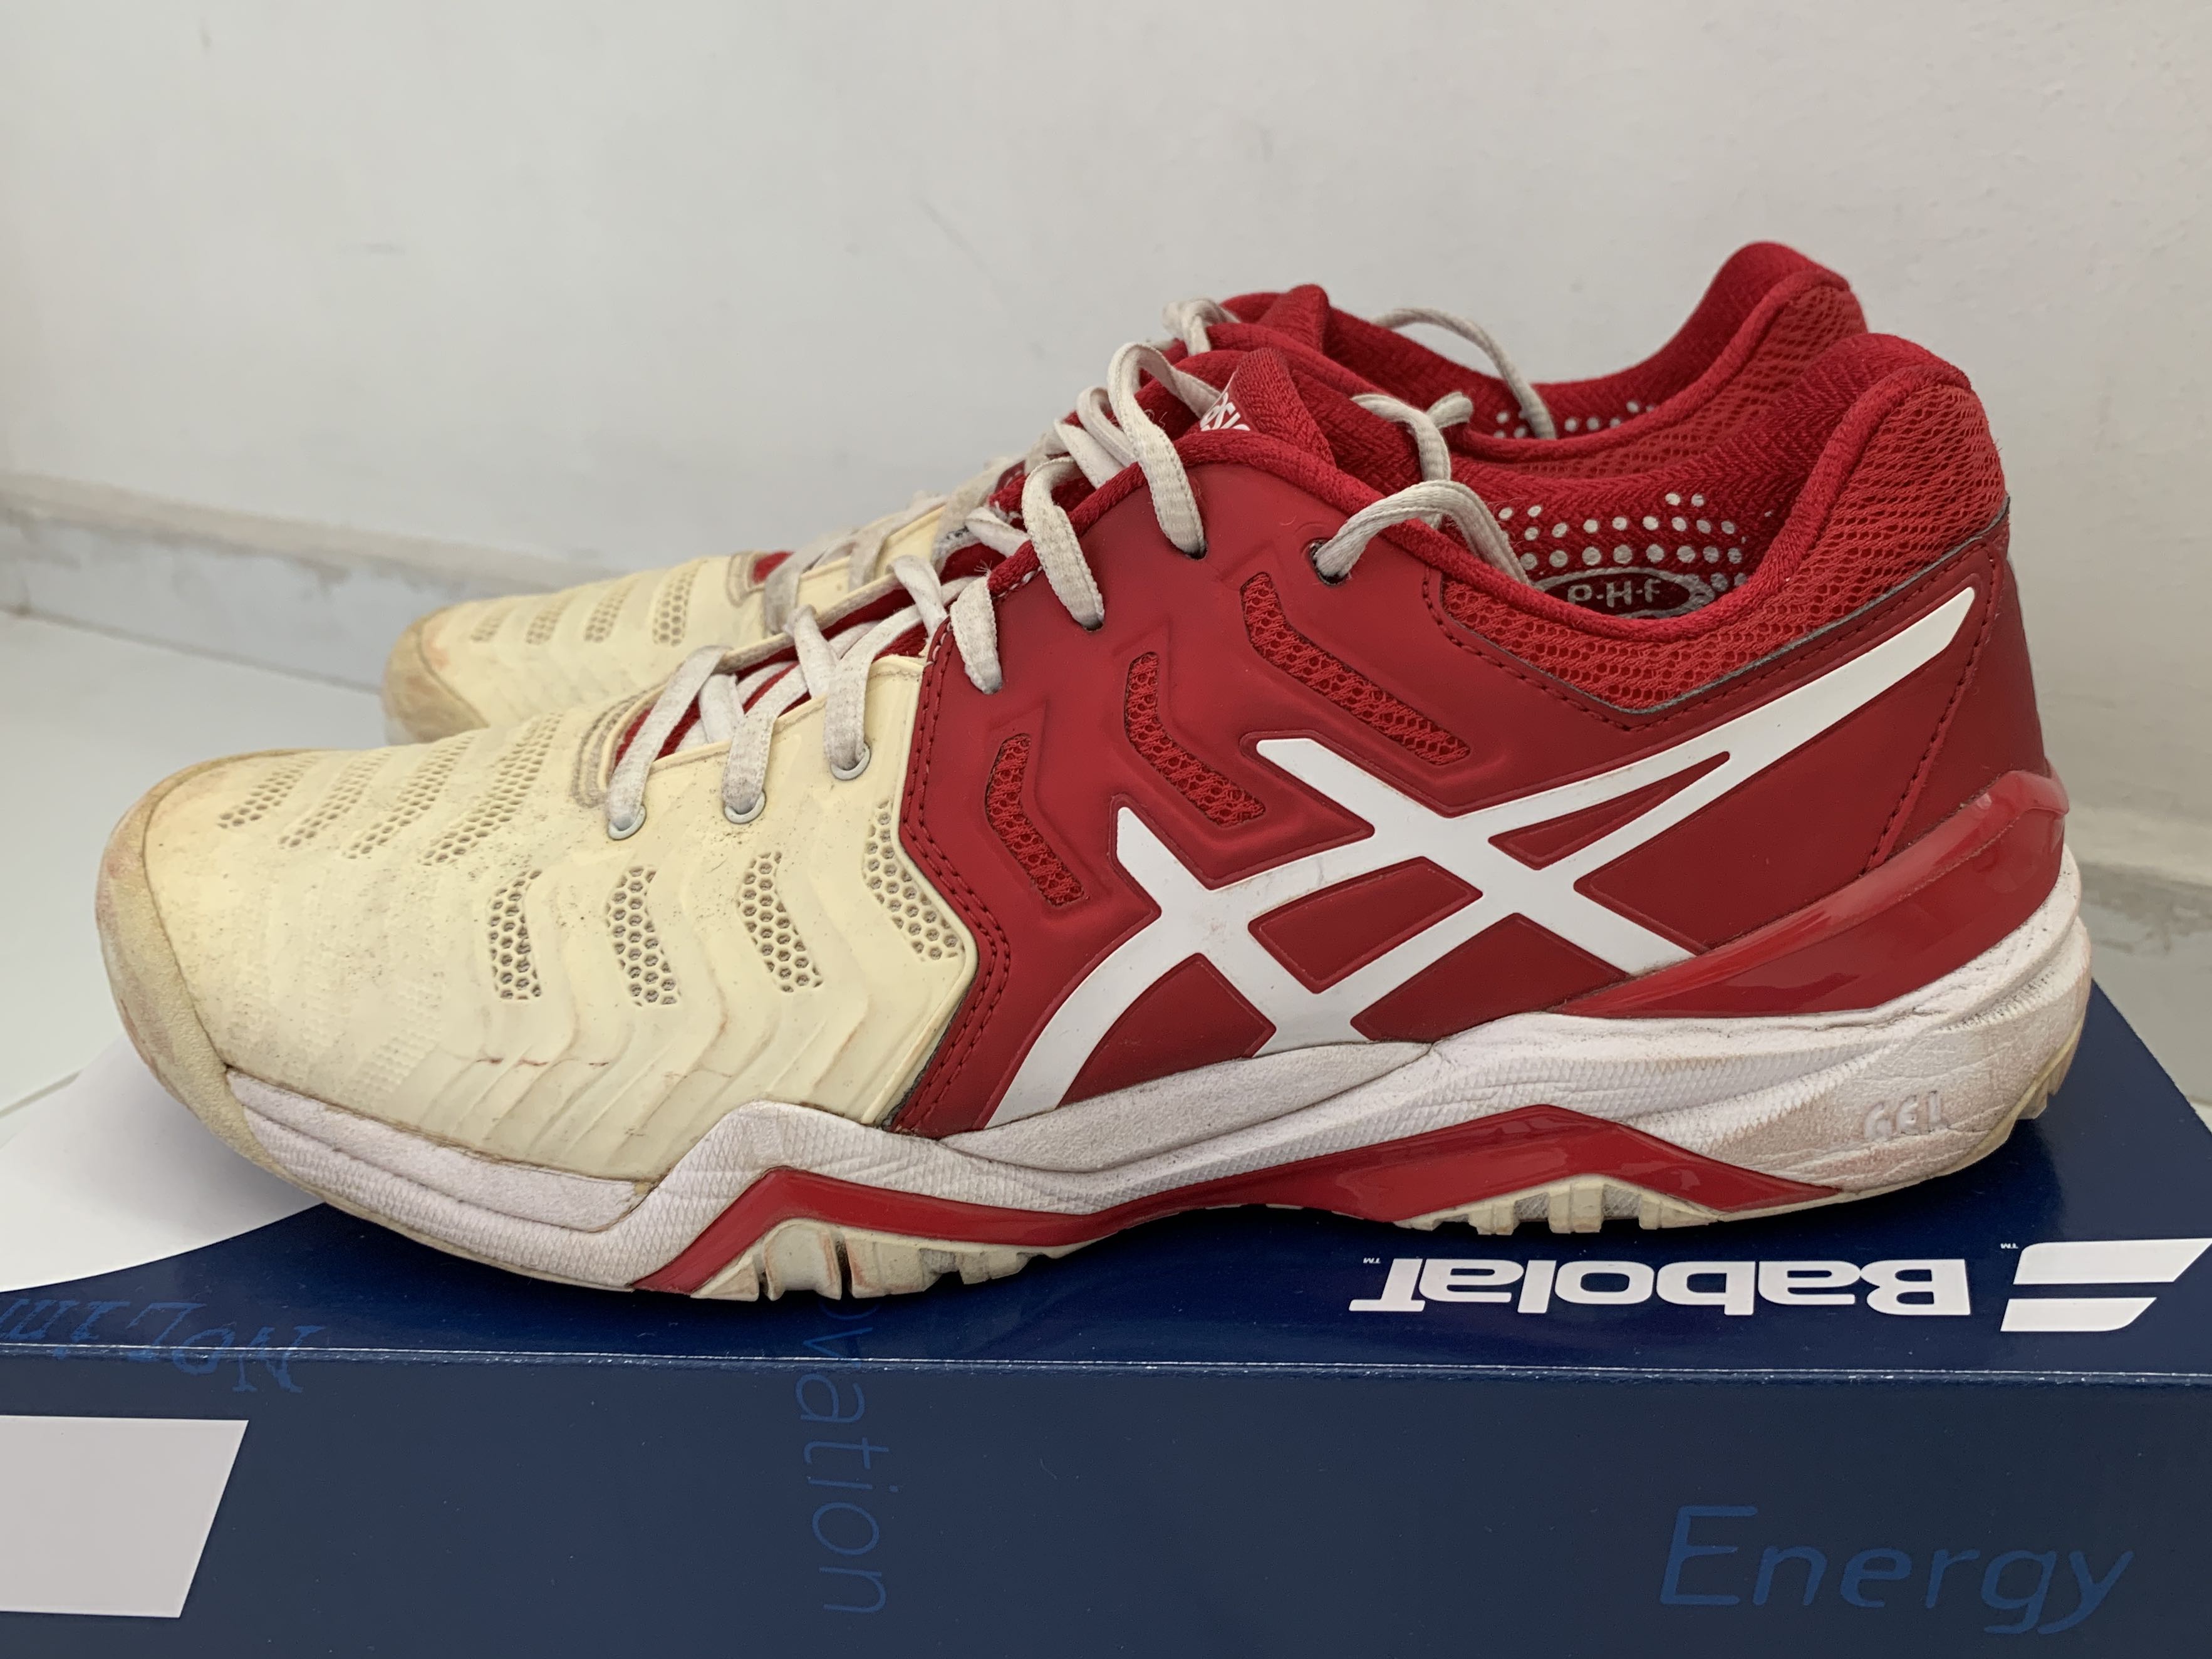 Asics Gel-Resolution 7 Red/White Tennis Sports Equipment, Sports & Games, & Ball Sports on Carousell